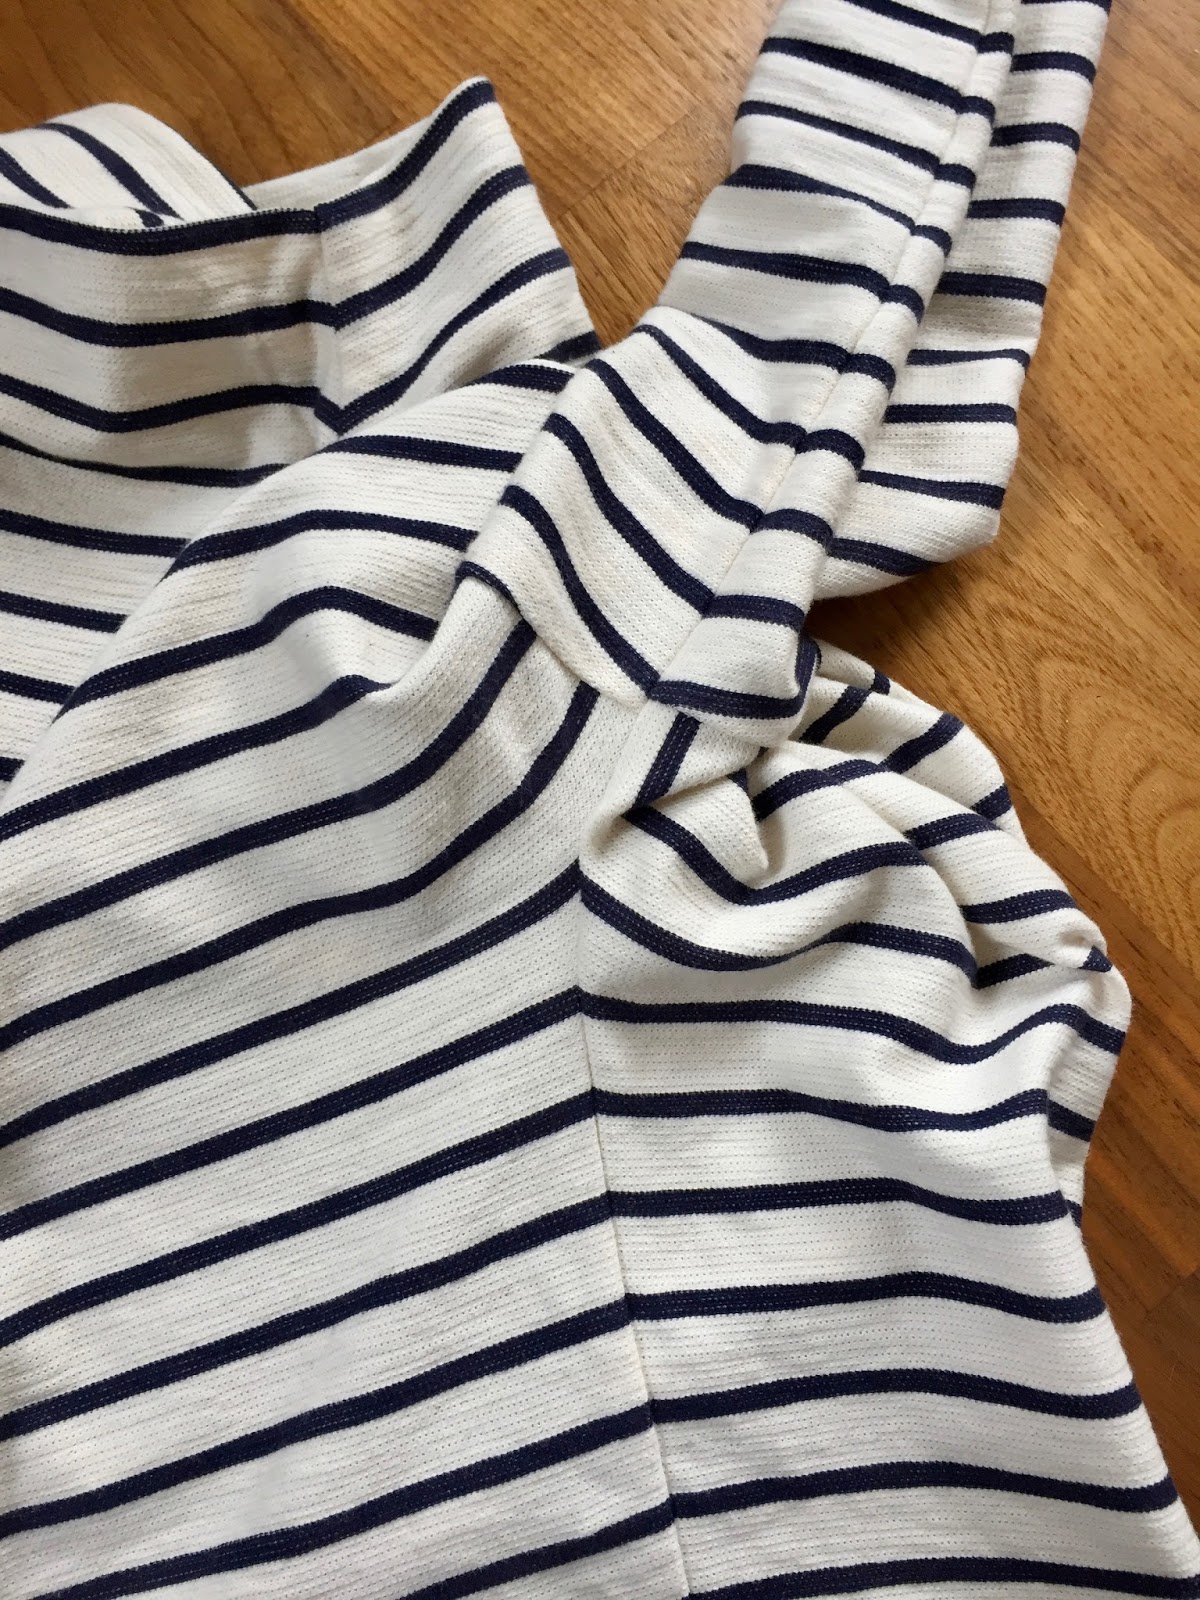 Diary of a Chain Stitcher : A Breton Top and a Danish adventure with ...